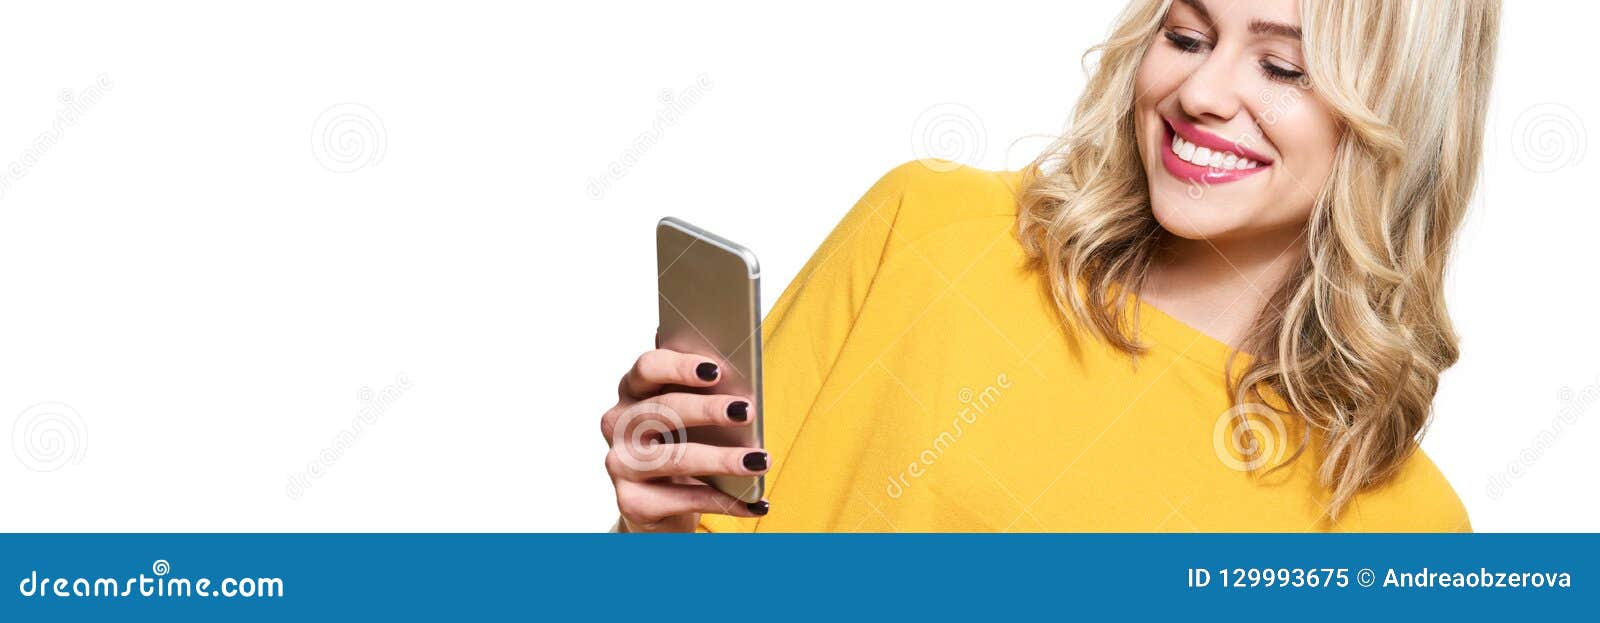 gorgeous smiling woman looking at her mobile phone. woman texting on her phone,  over white background.